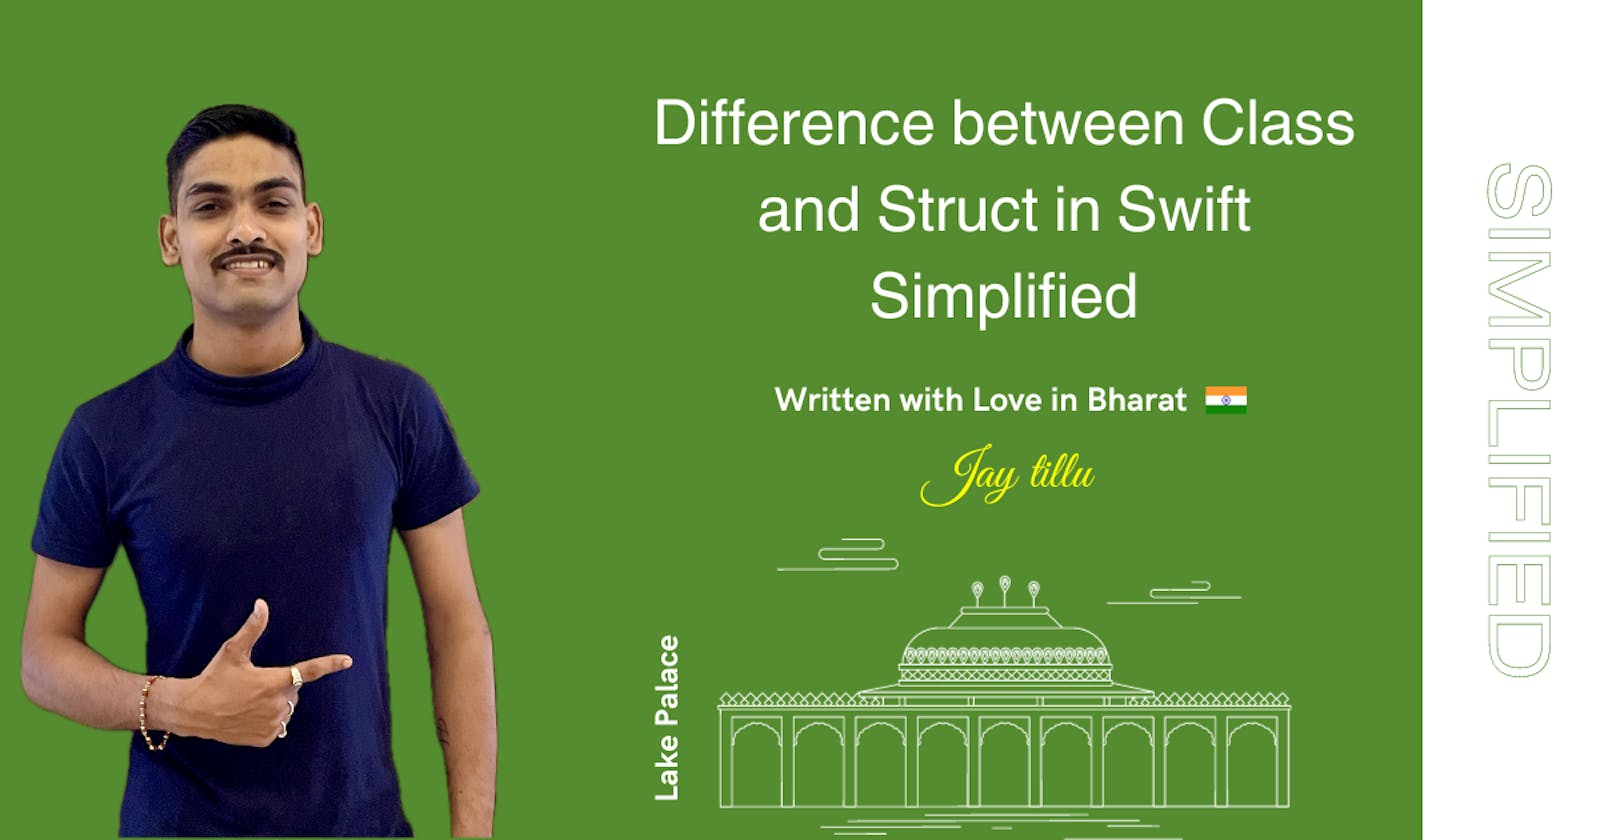 Difference between Class and Struct in Swift - Simplified